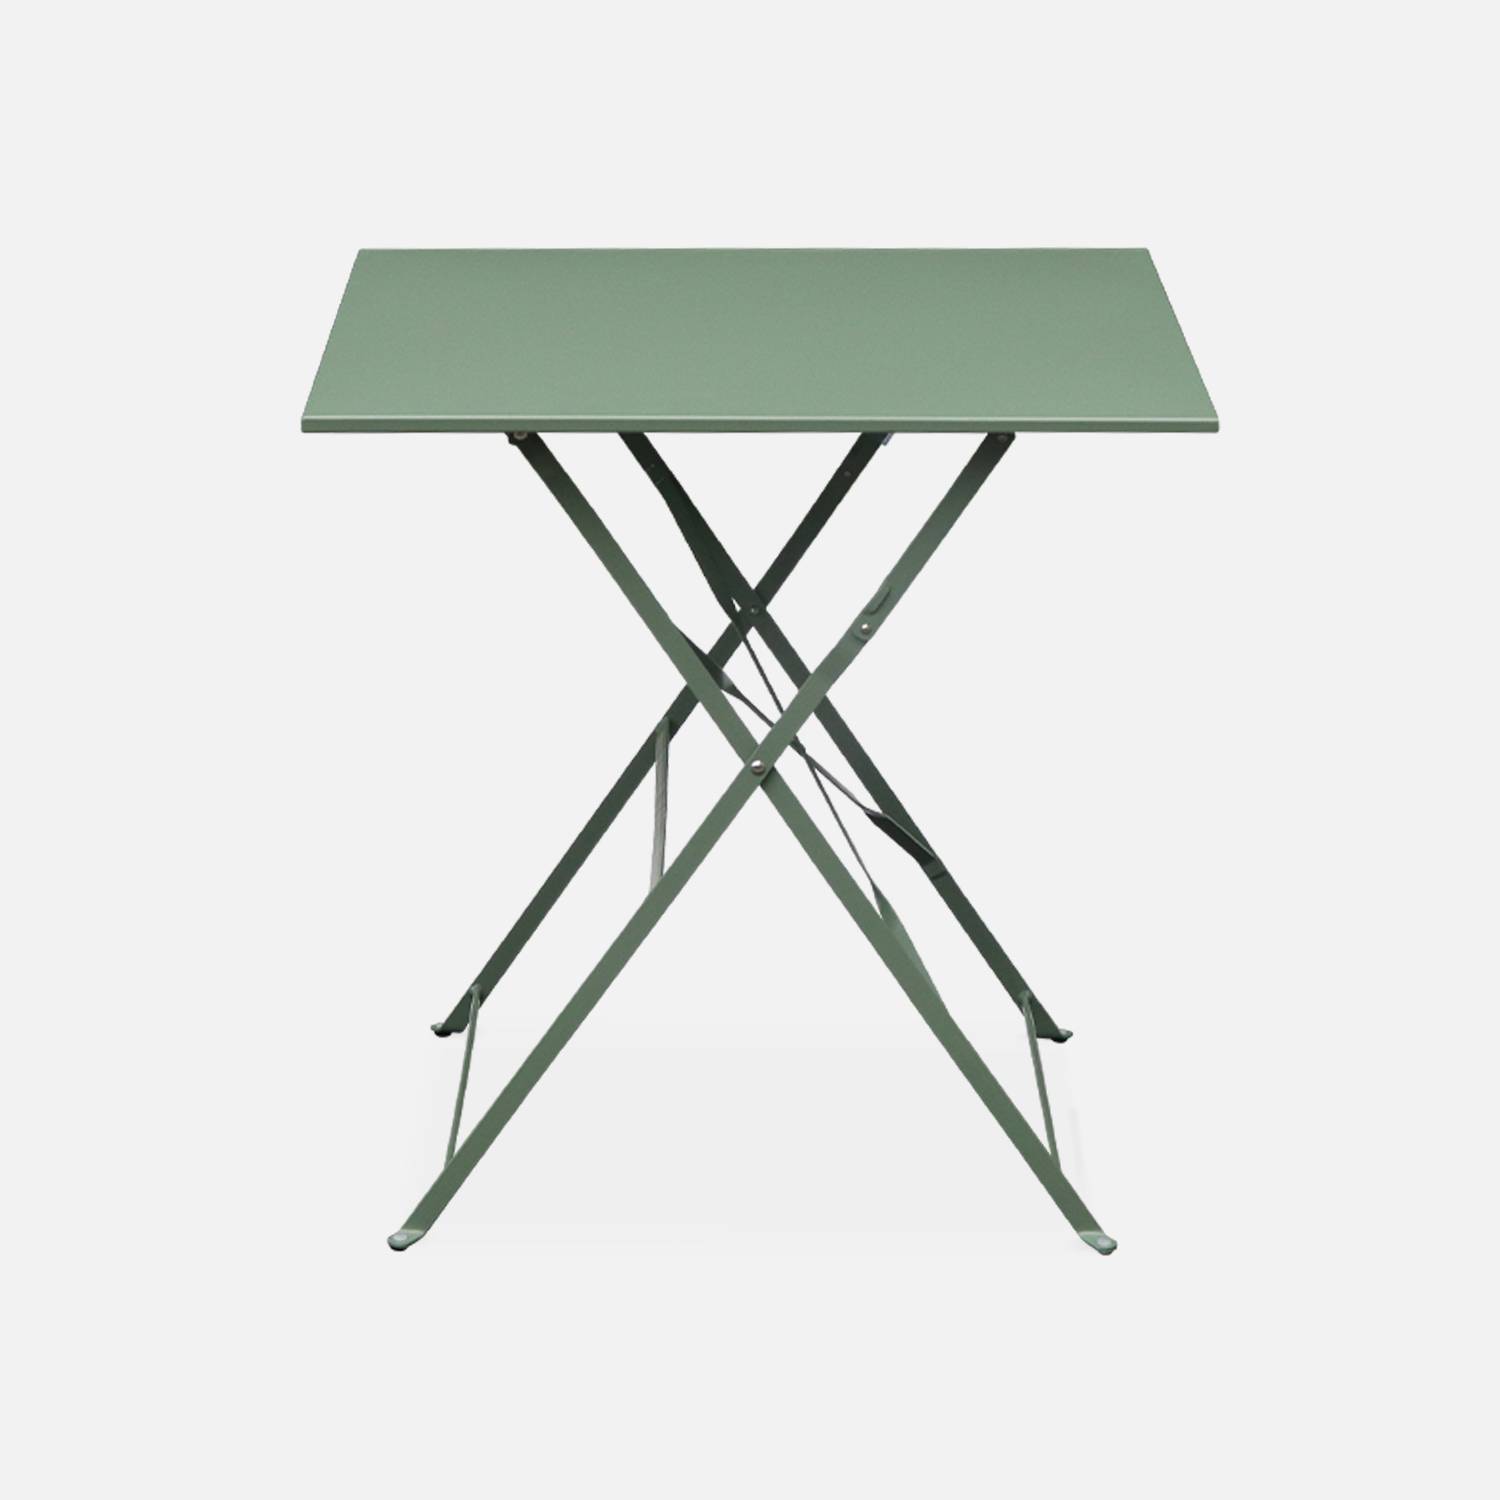 2-seater foldable thermo-lacquered steel bistro garden table with chairs, 70x70cm - Emilia - Sage geen Photo3